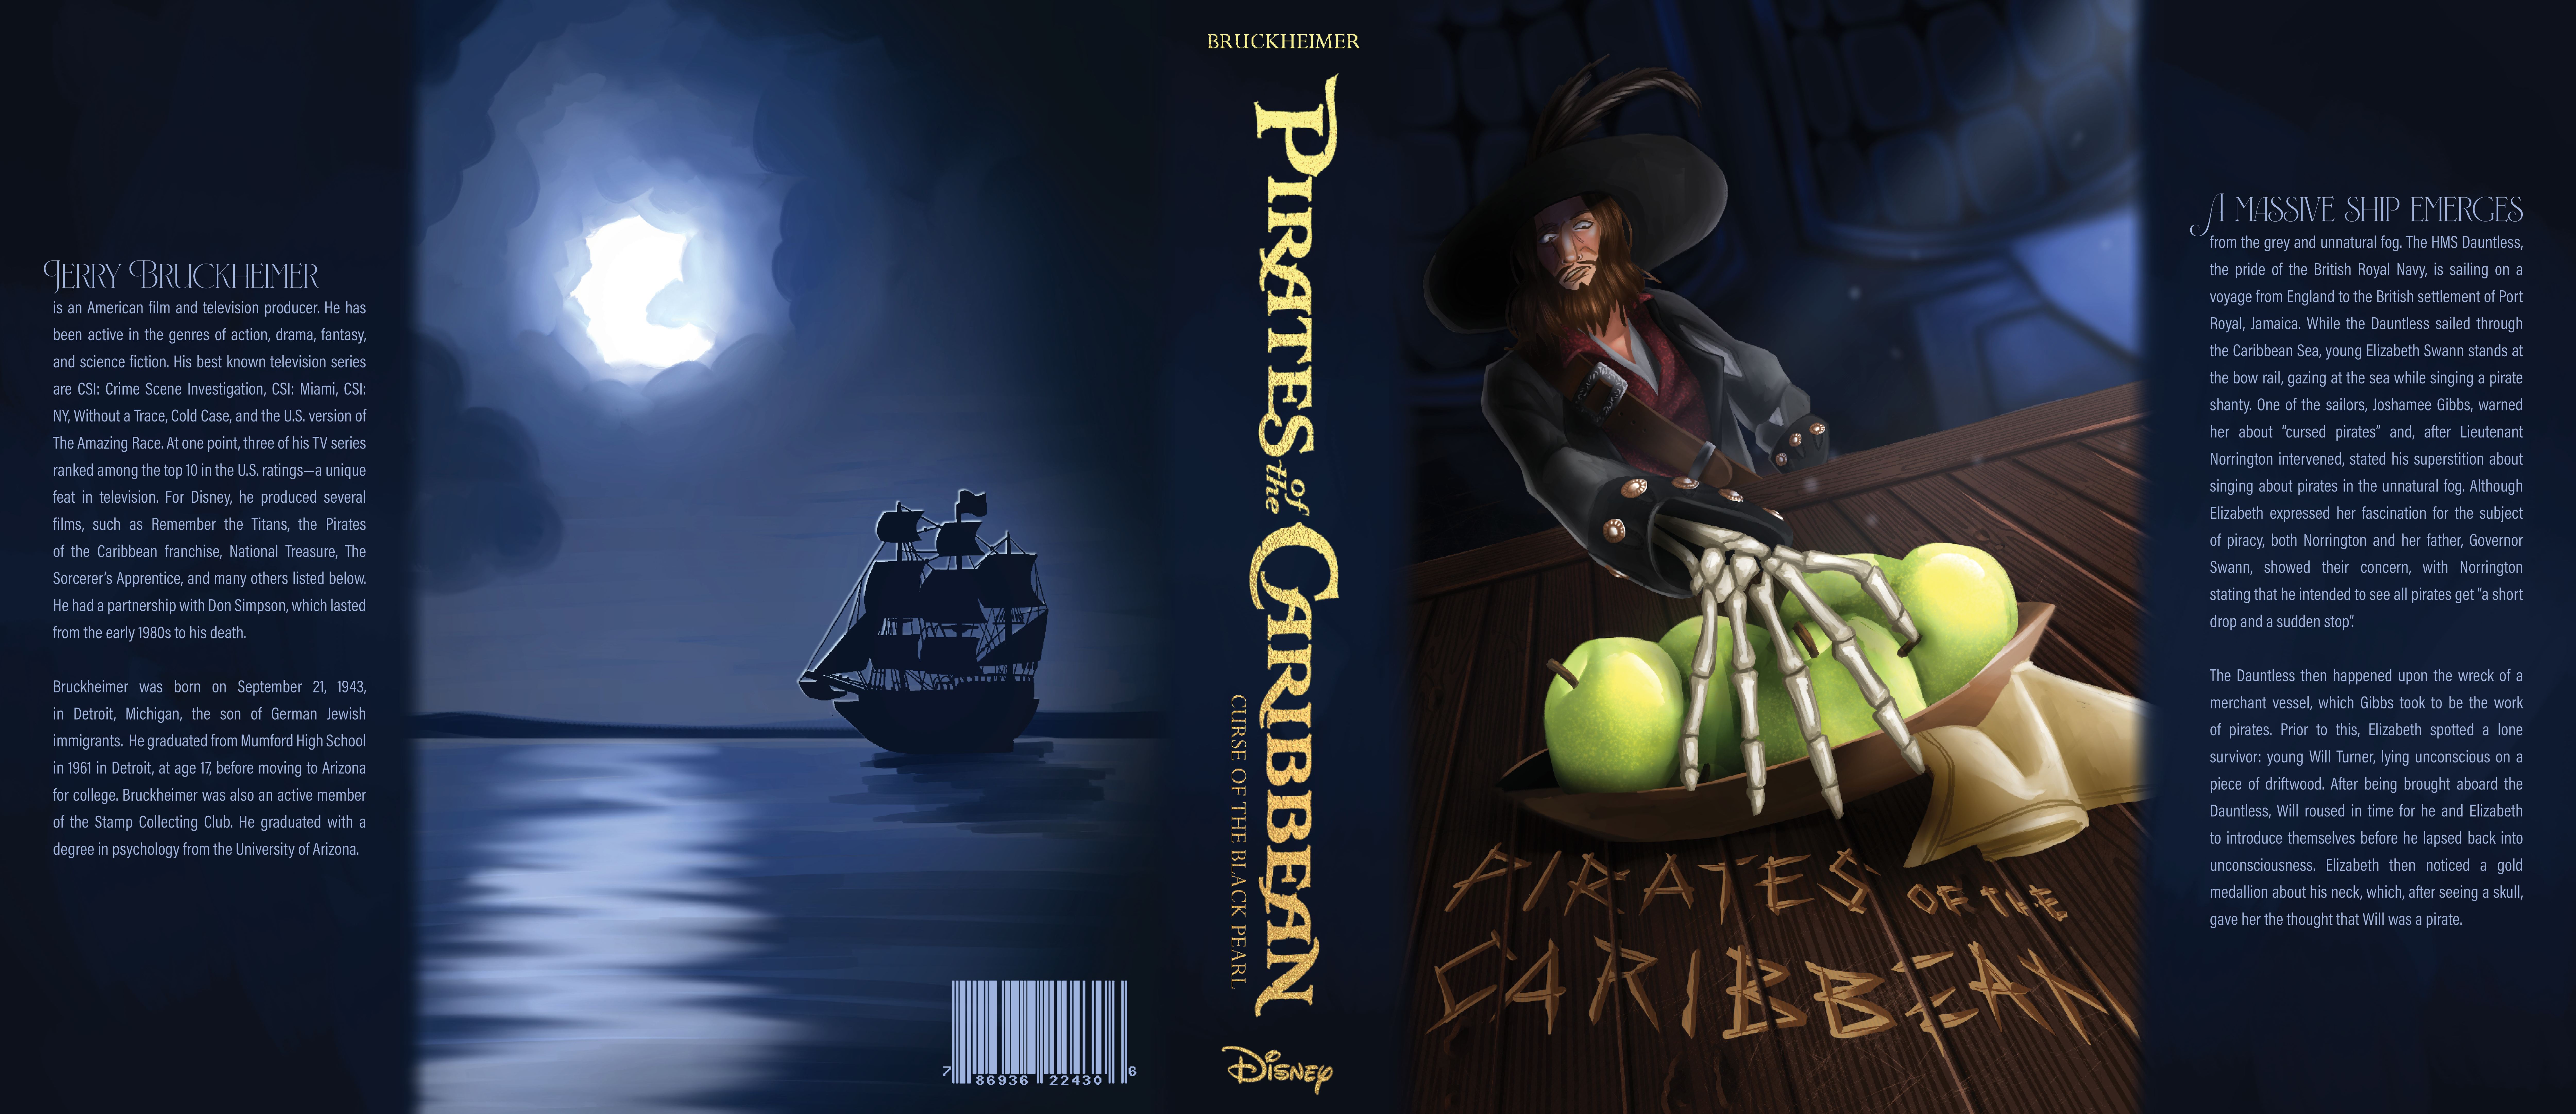 Pirates of the Caribbean Book Cover